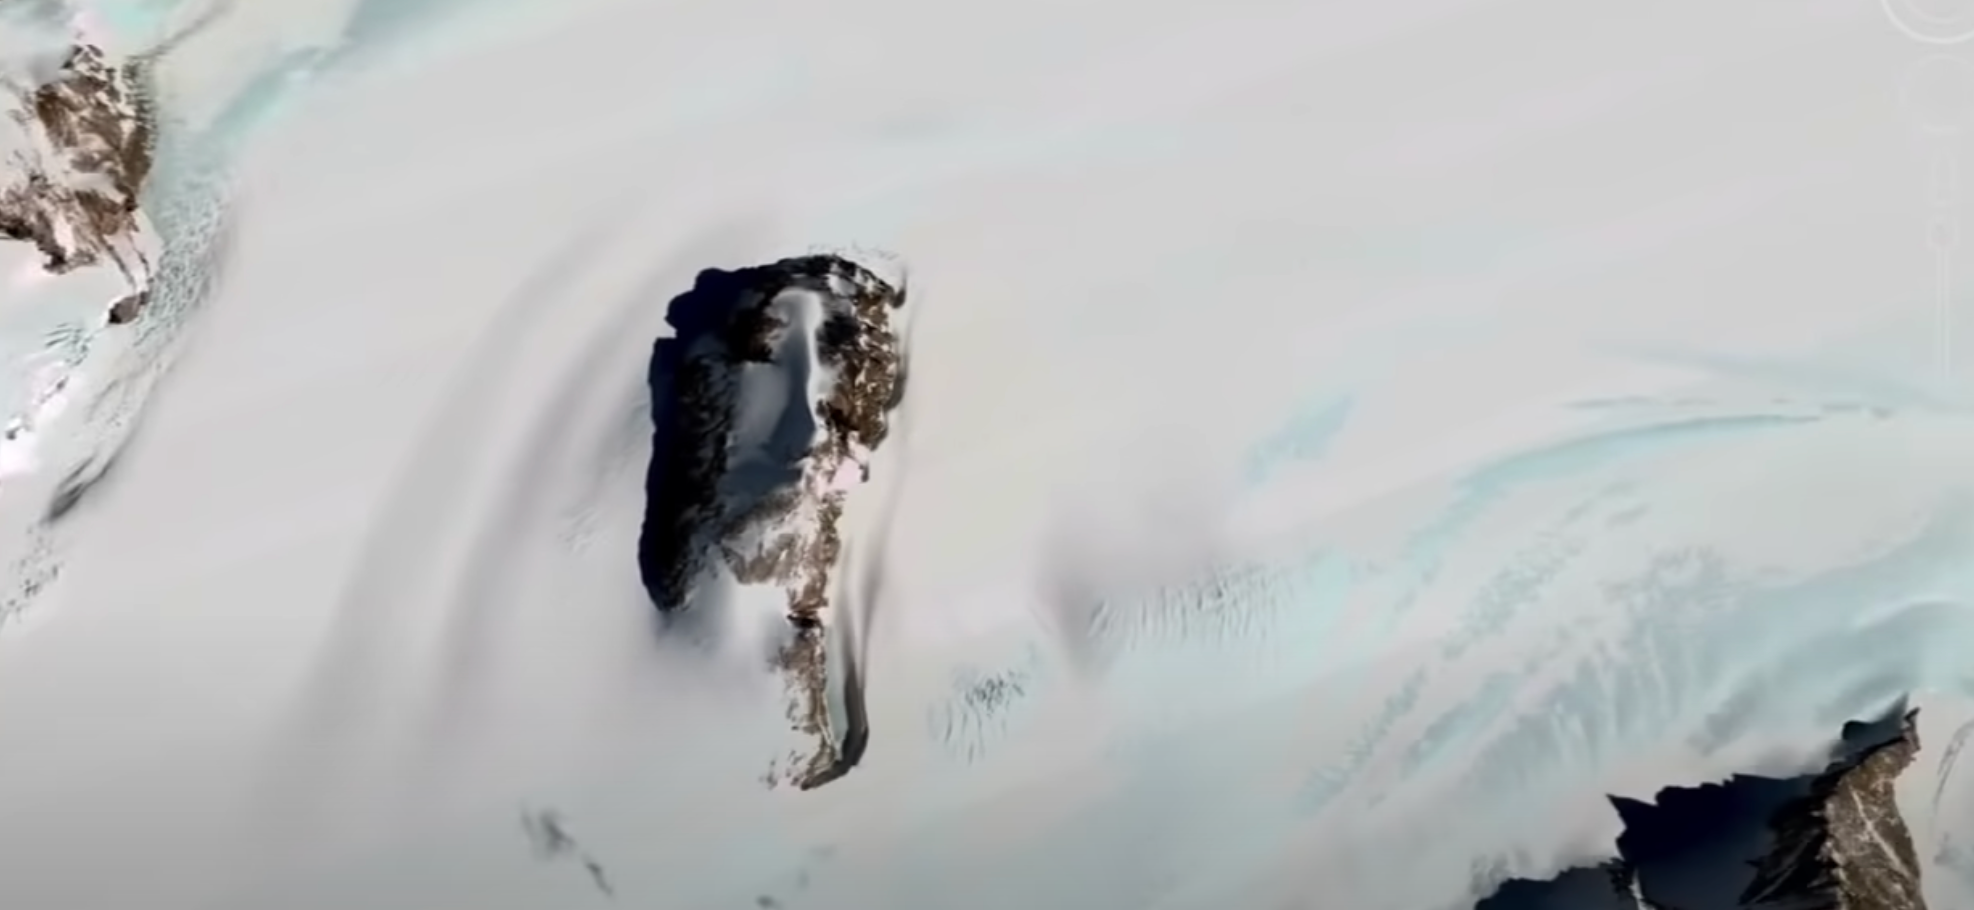 A screenshot from Google Earth allegedly showing the Face of Jesus in Antartica. Image Credit: Google Maps.